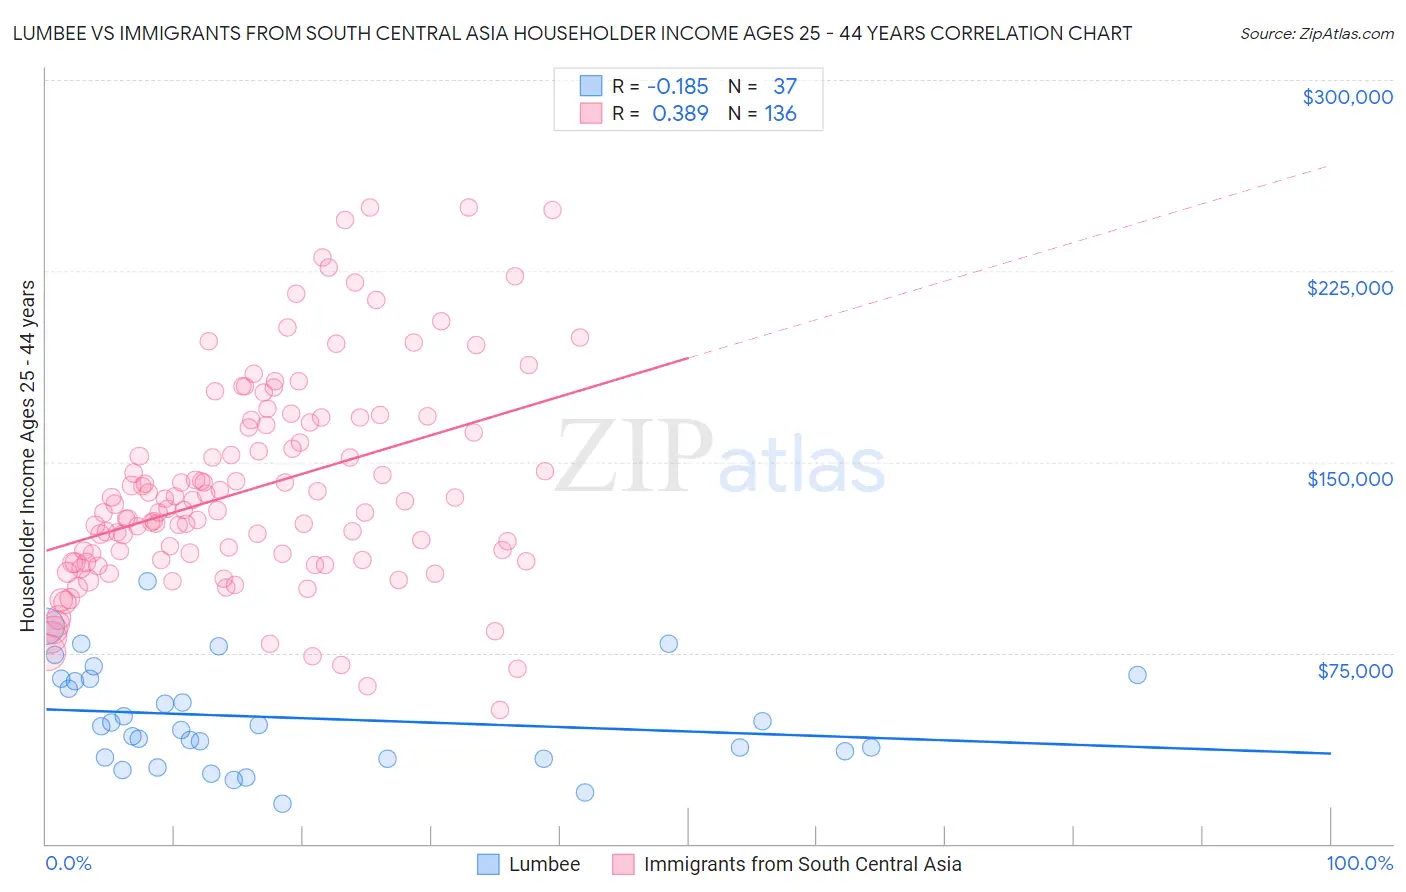 Lumbee vs Immigrants from South Central Asia Householder Income Ages 25 - 44 years